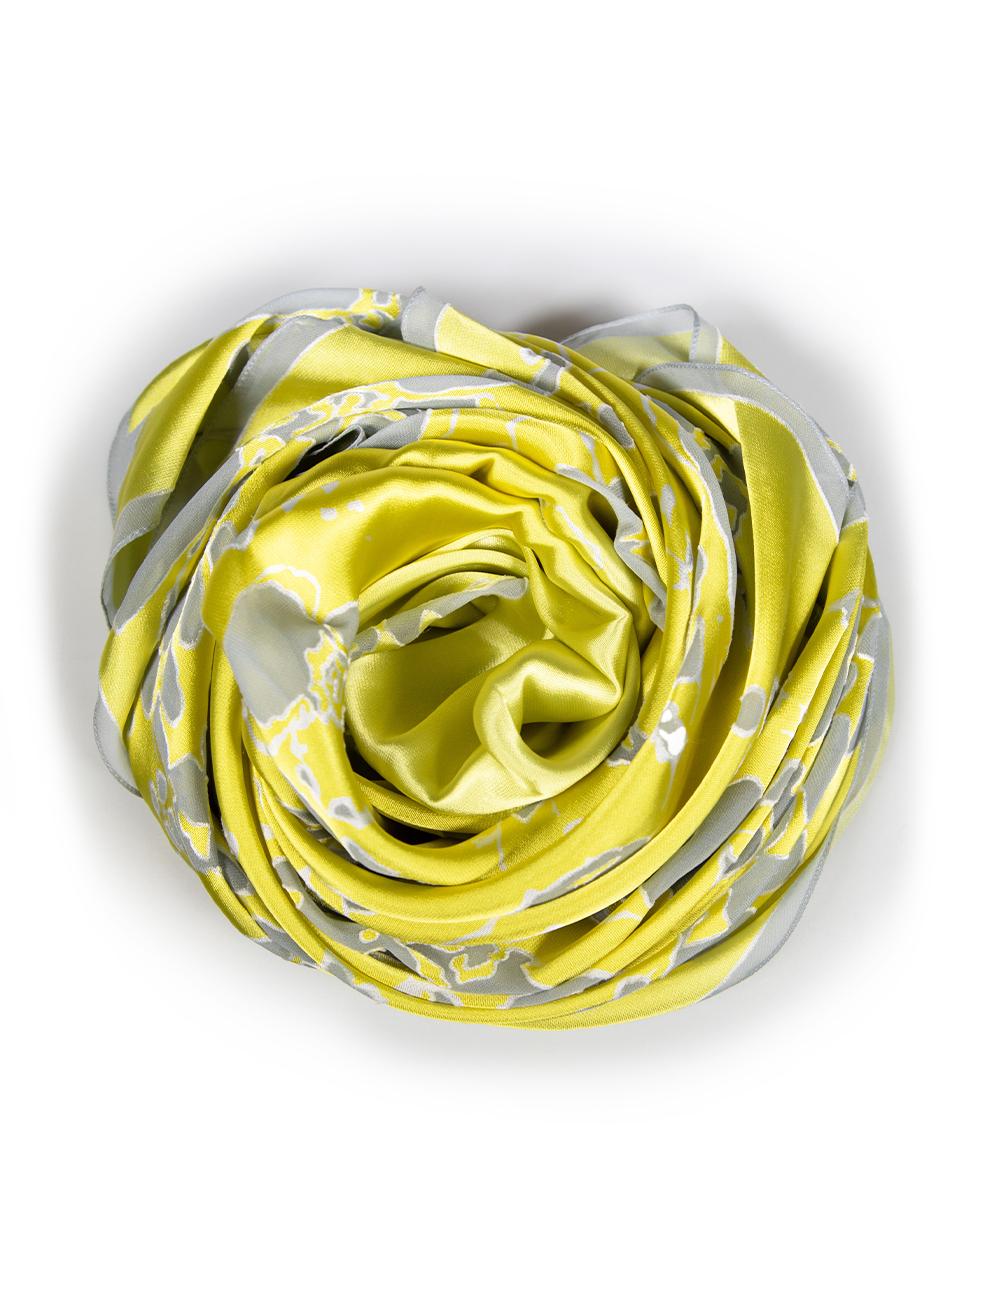 CONDITION is Very good. Minimal wear to scarf is evident. Minimal wear to scarf edge where a small mark can be seen on this used Givenchy designer resale item.
 
 
 
 Details
 
 
 Yellow
 
 Viscose
 
 Square scarf
 
 Floral pattern
 
 Partially